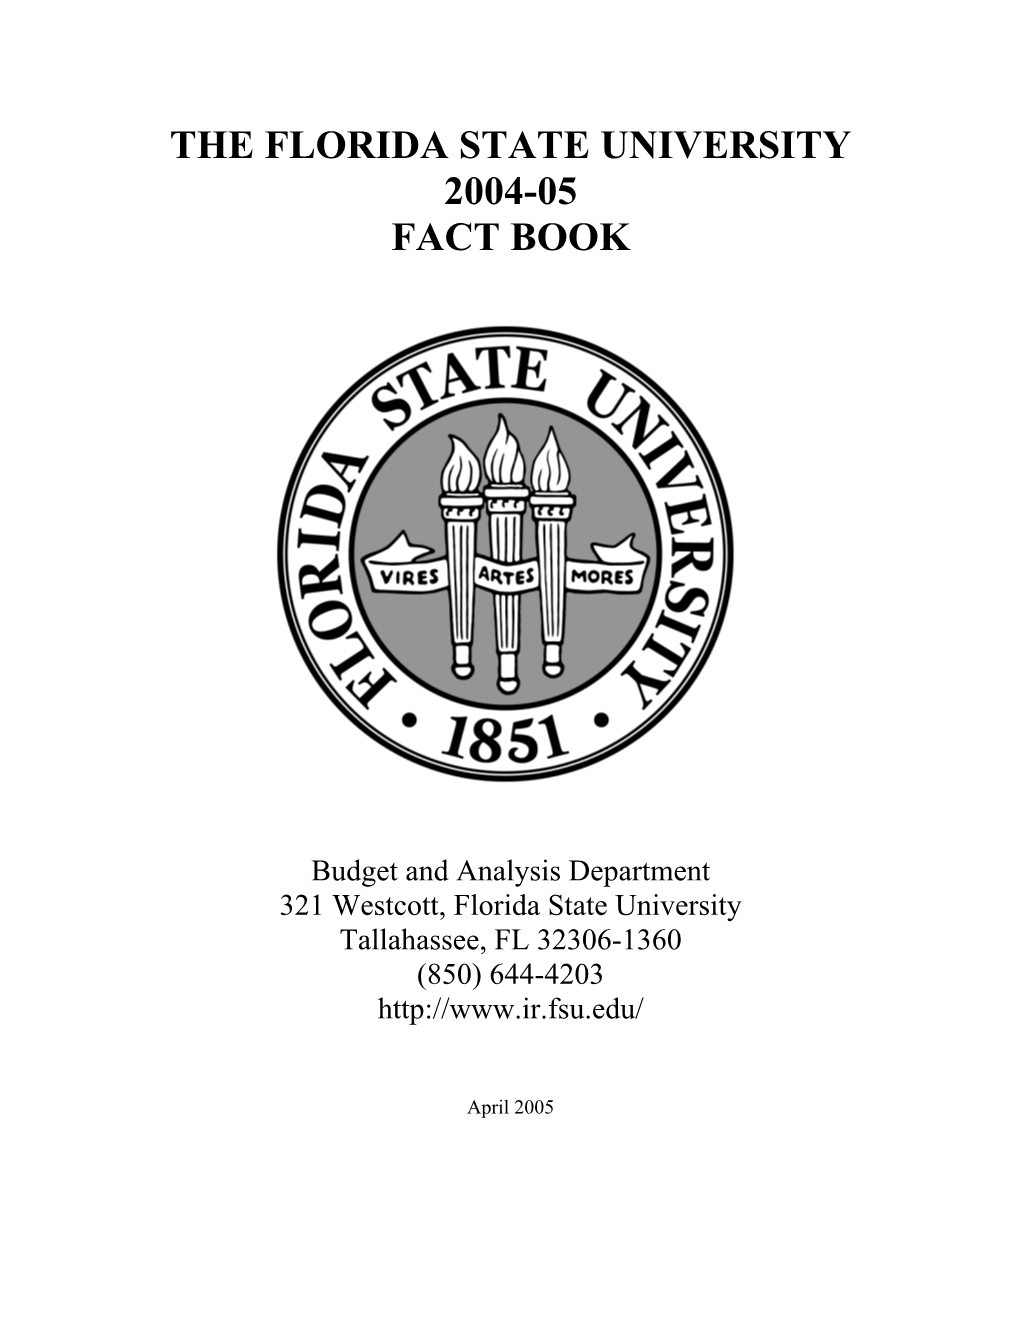 The Florida State University 2004-05 Fact Book